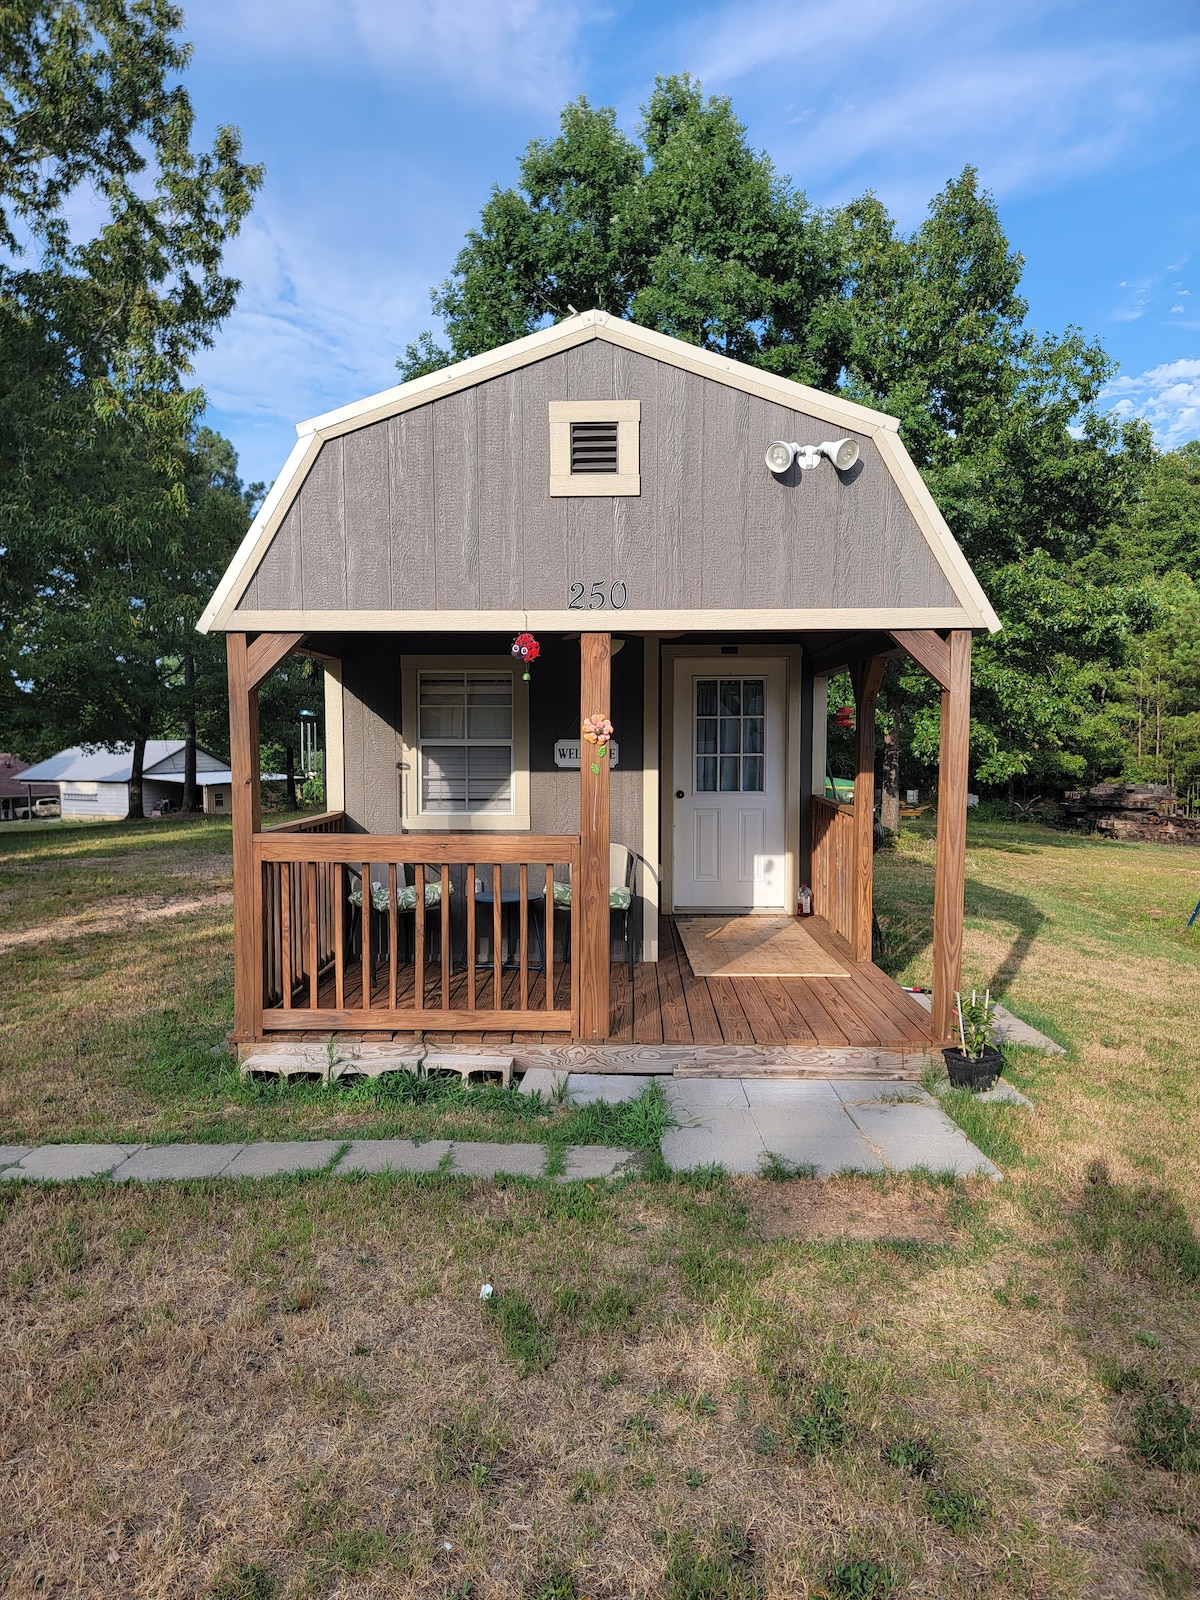 Cheerful Country Tiny Home!